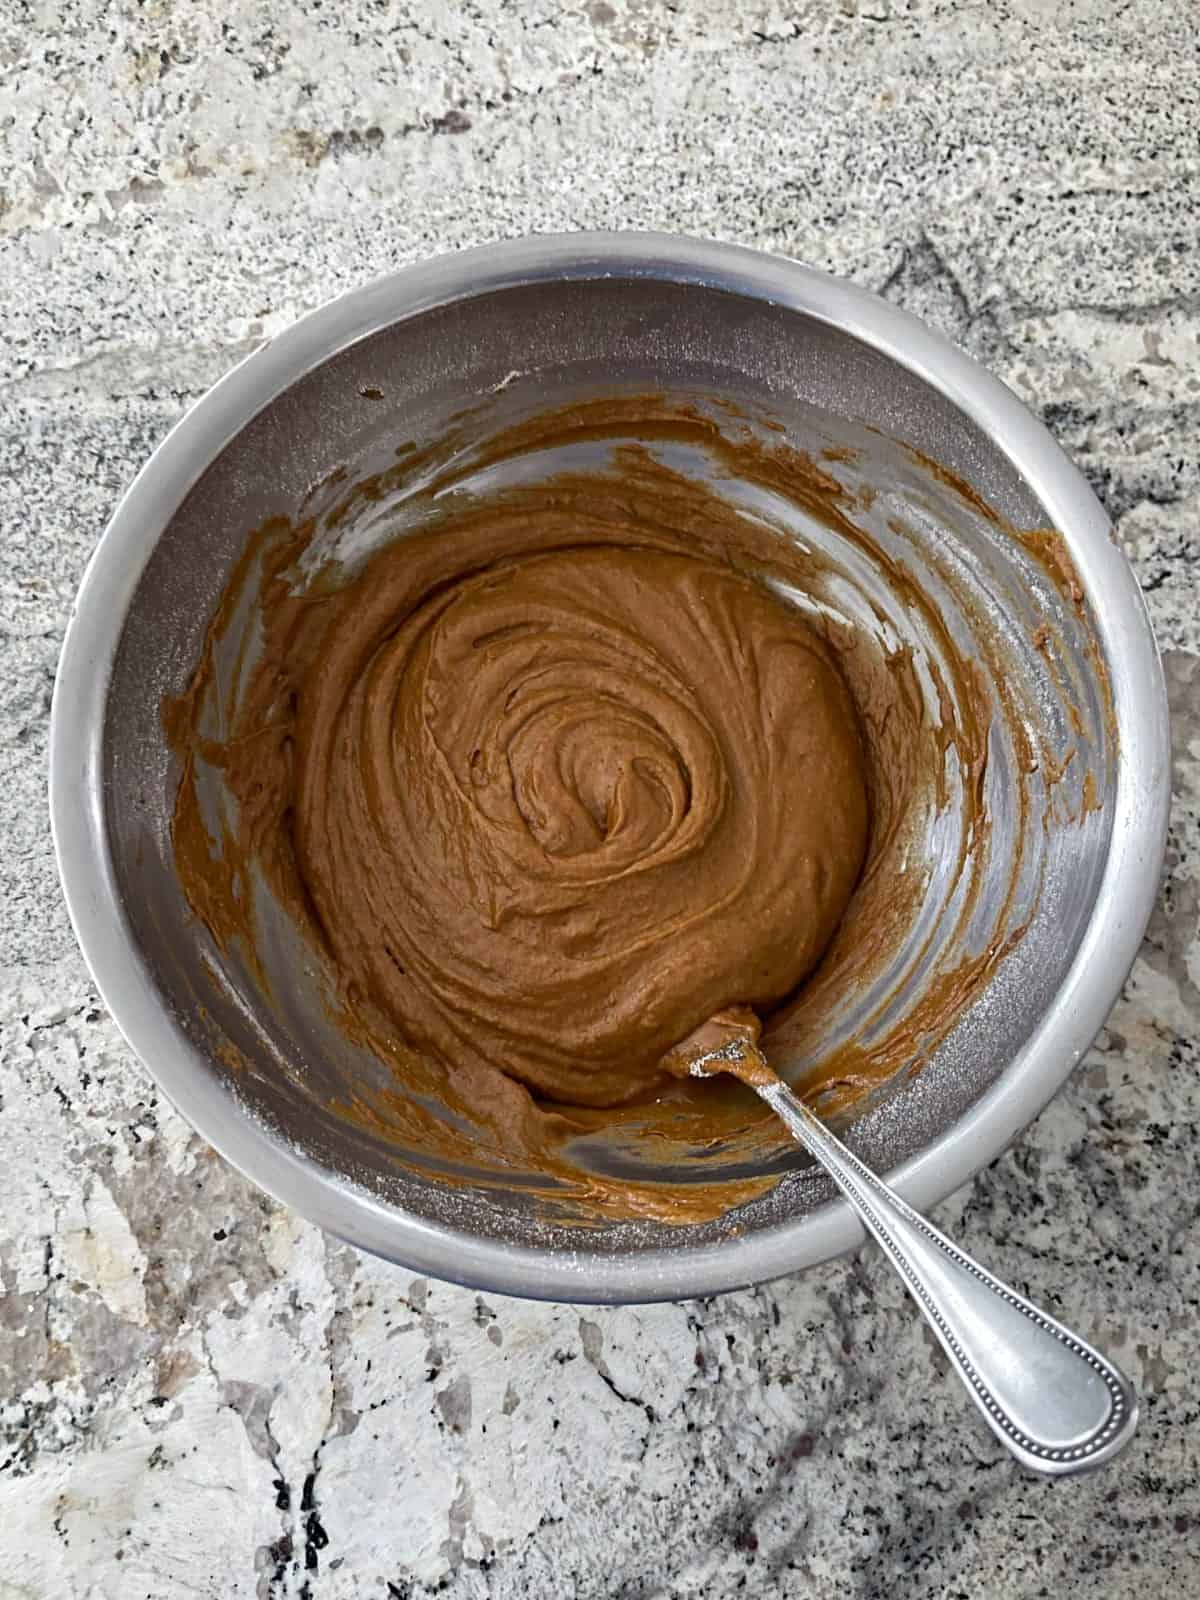 Mixing pumpkin spice latter donut batter in mixing bowl with fork.